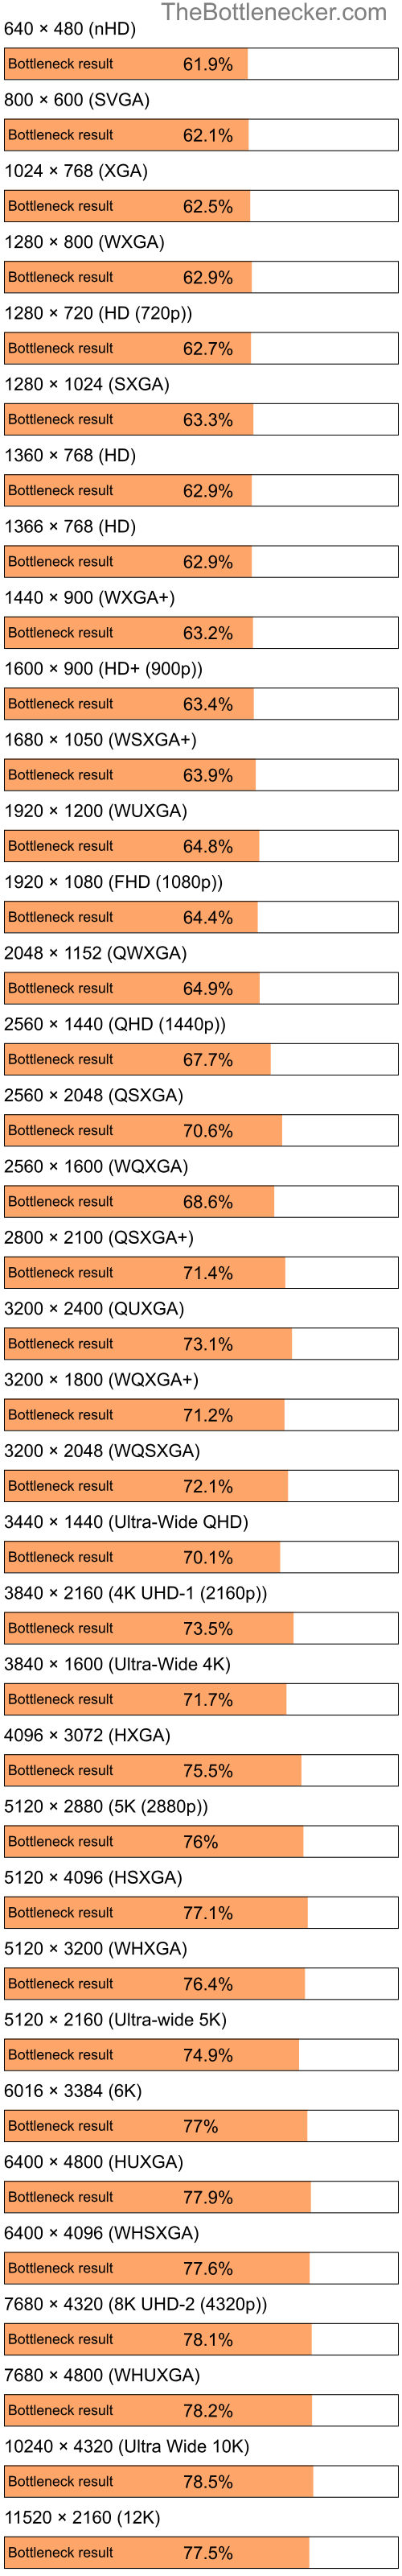 Bottleneck results by resolution for Intel Pentium 4 and AMD Mobility Radeon HD 2400 XT in General Tasks